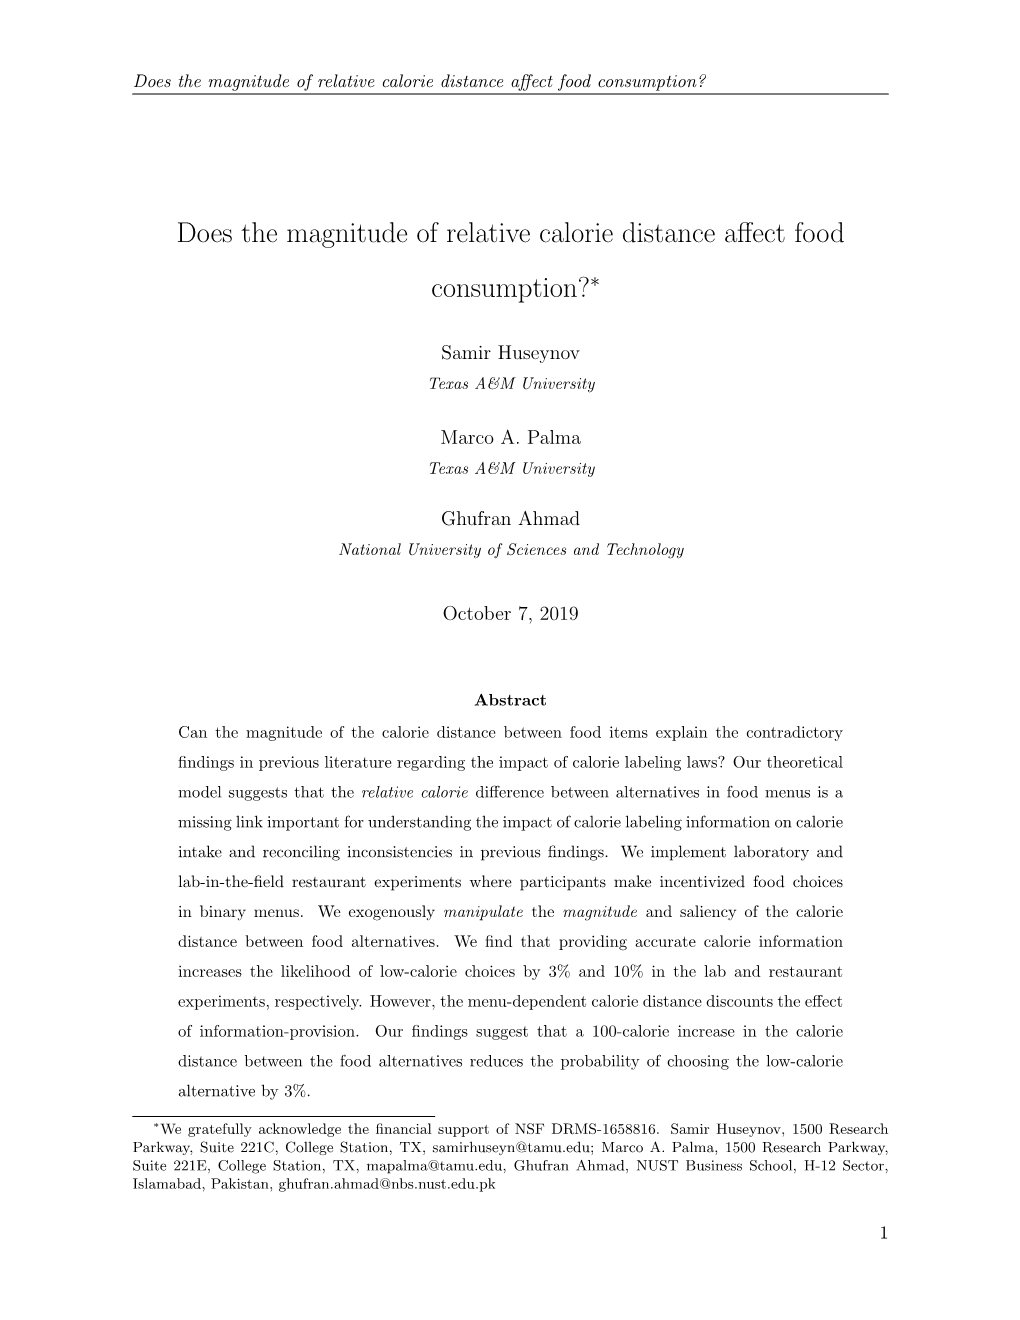 Does the Magnitude of Relative Calorie Distance Affect Food Consumption?